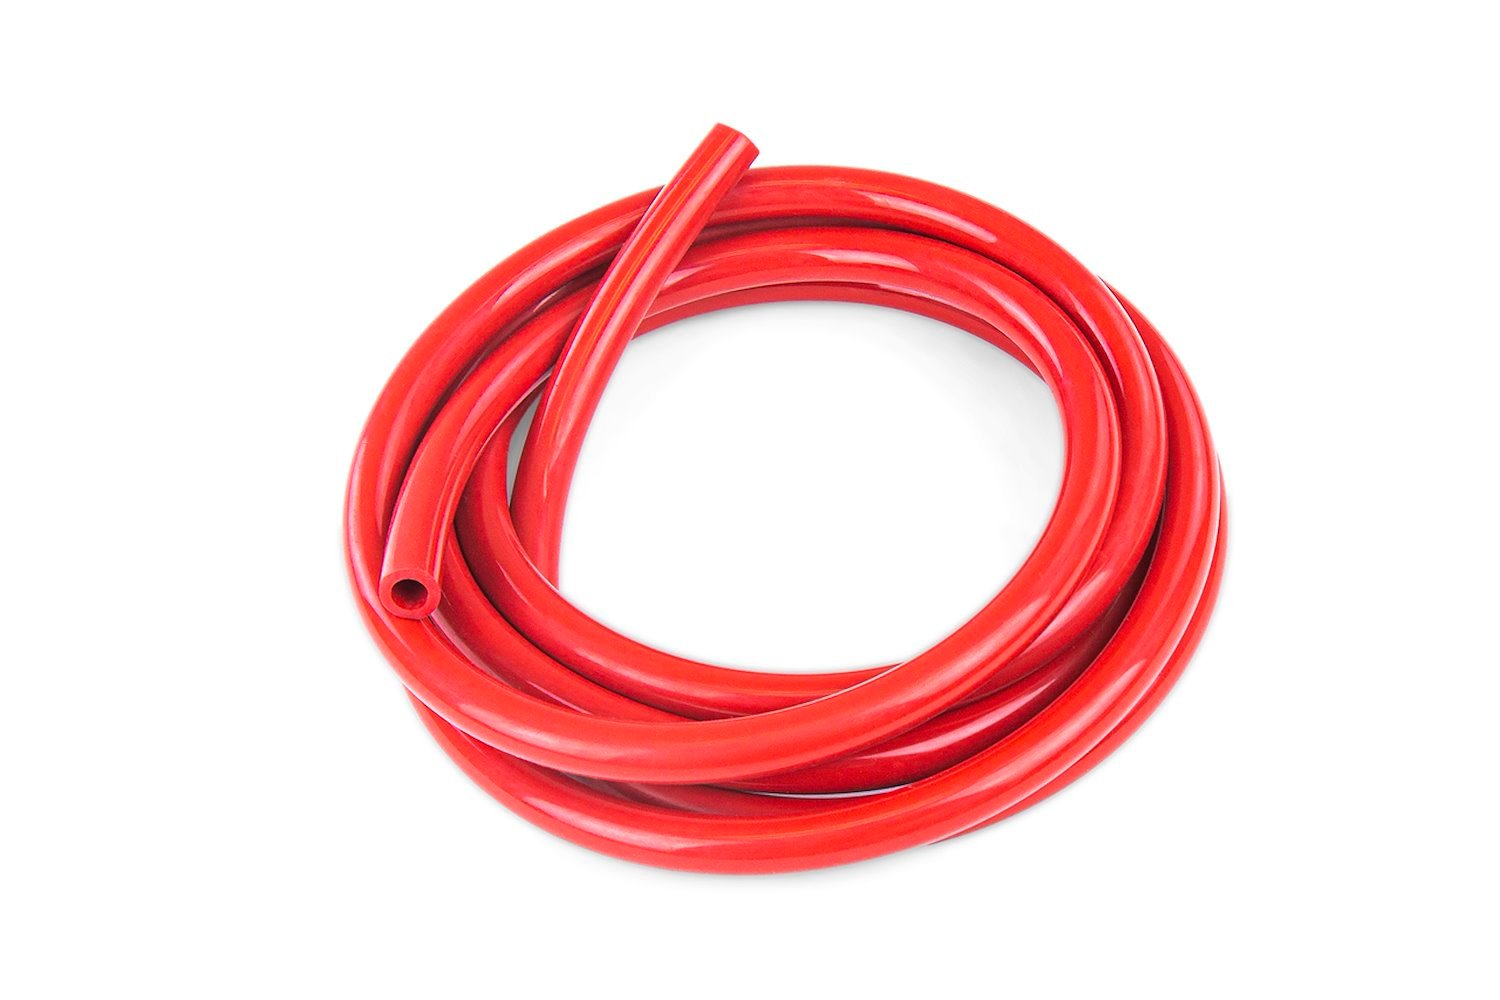 HTSVH8-REDx25 High-Temperature Silicone Vacuum Hose Tubing, 5/16 in. ID, 25 ft. Roll, Red